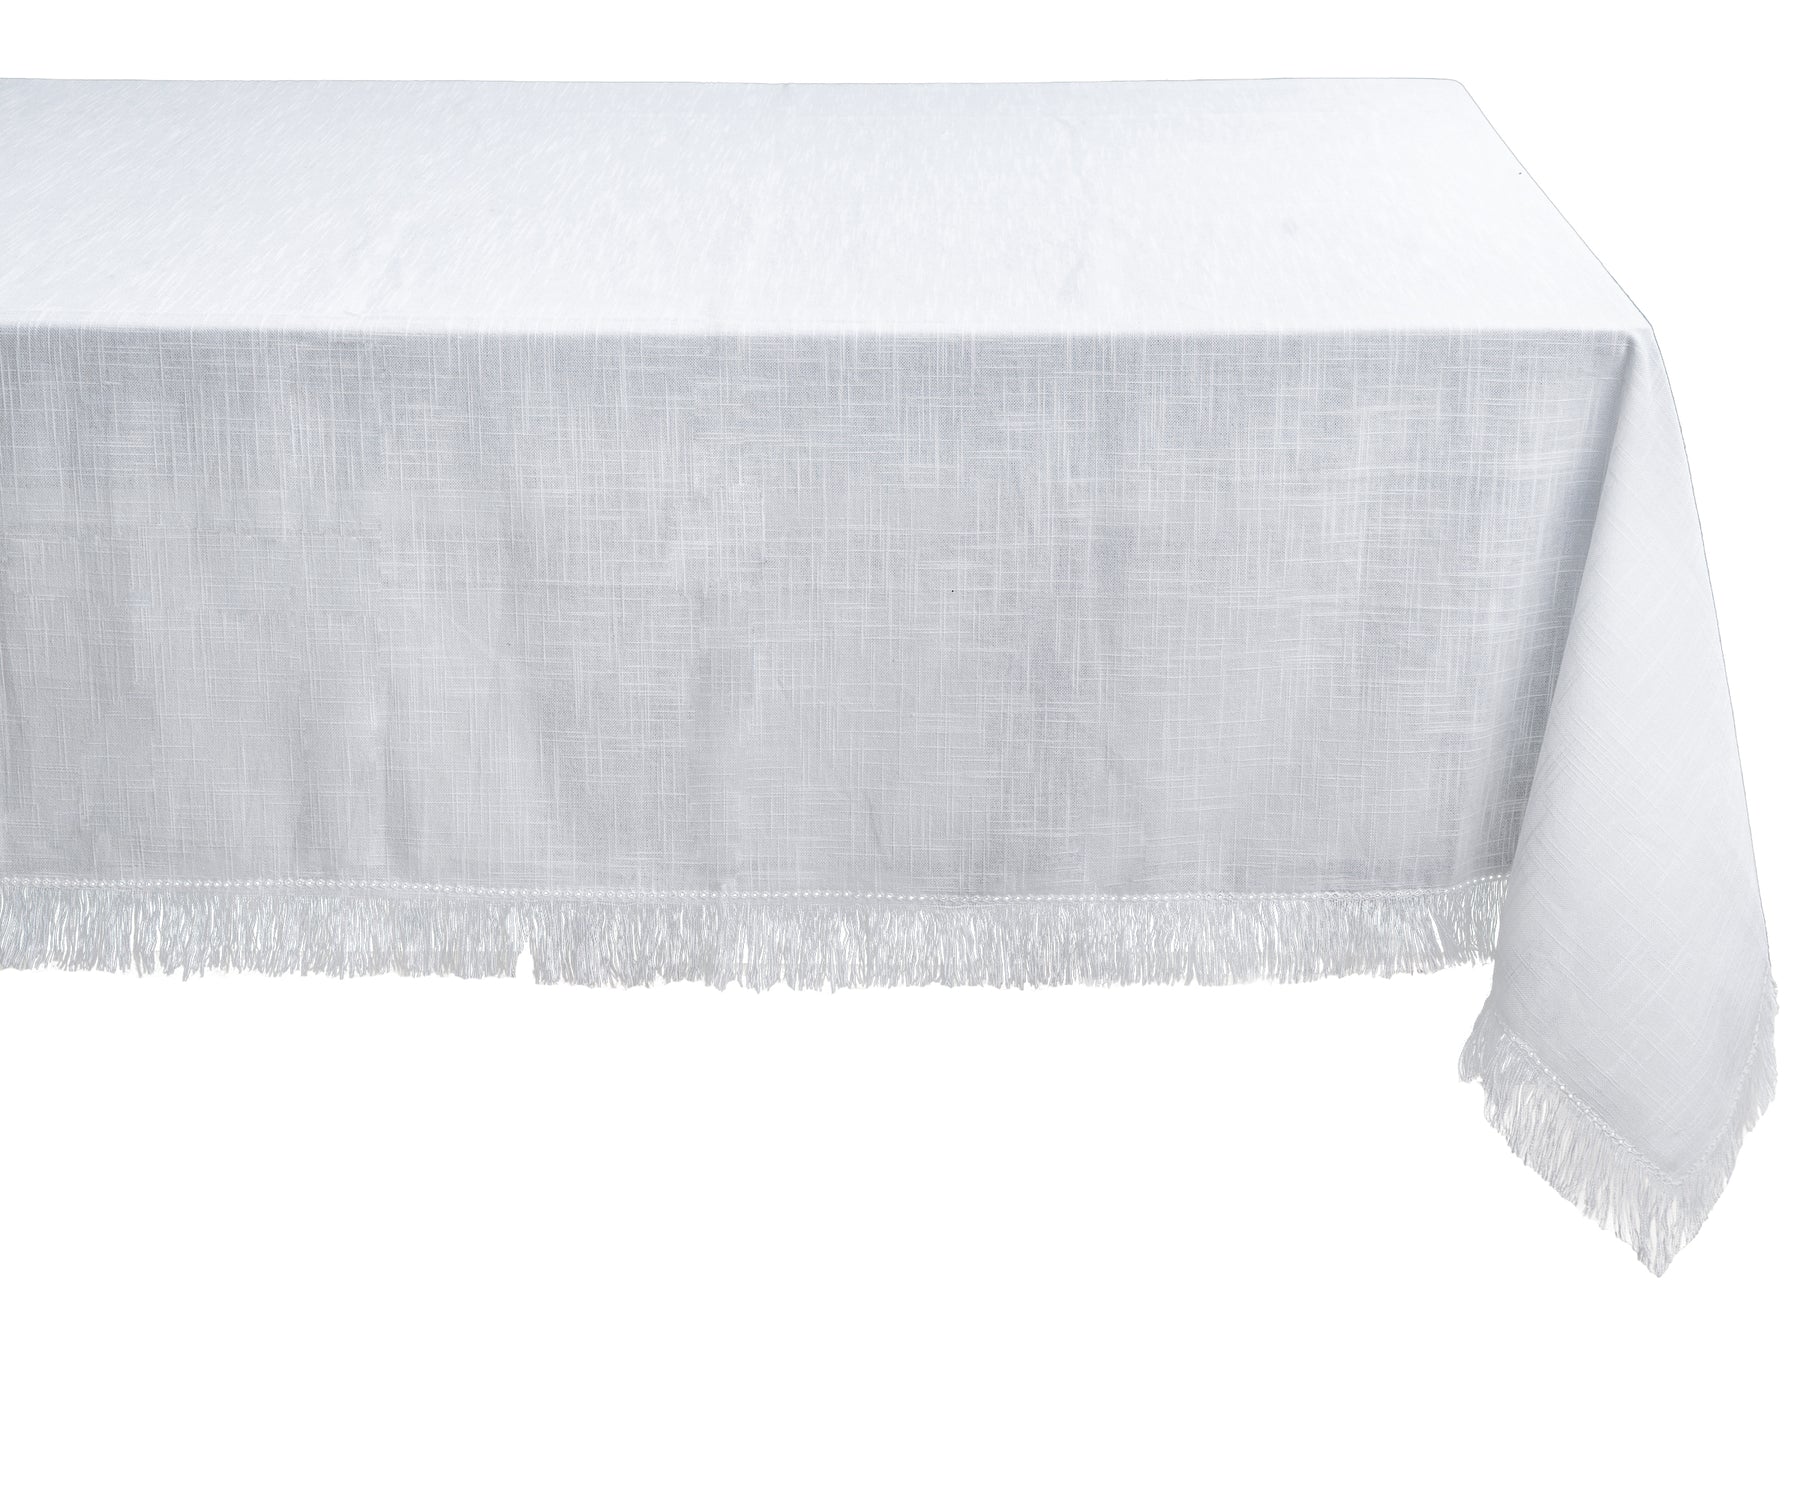 White tablecloths offer timeless elegance and adapt beautifully to diverse events, from casual to formal.